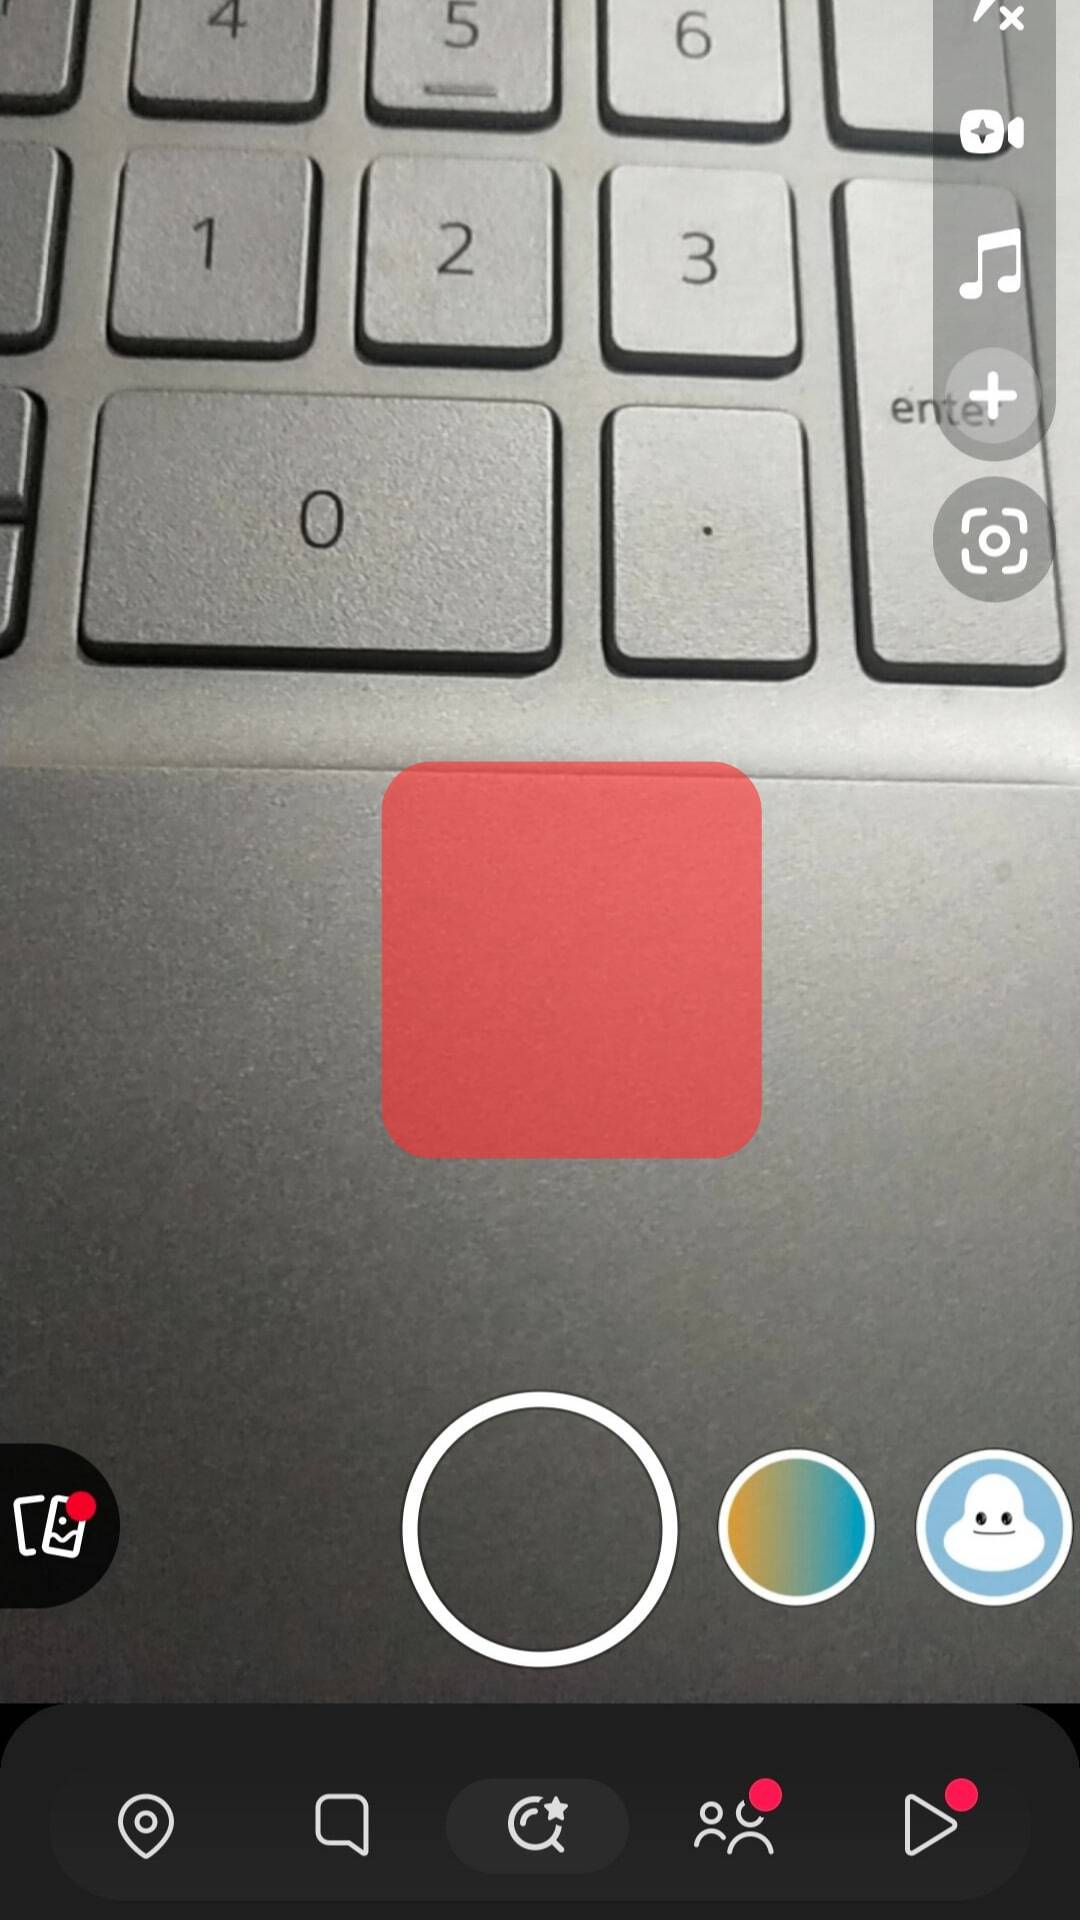 Tap Anywhere On The Screen In The Camera View.